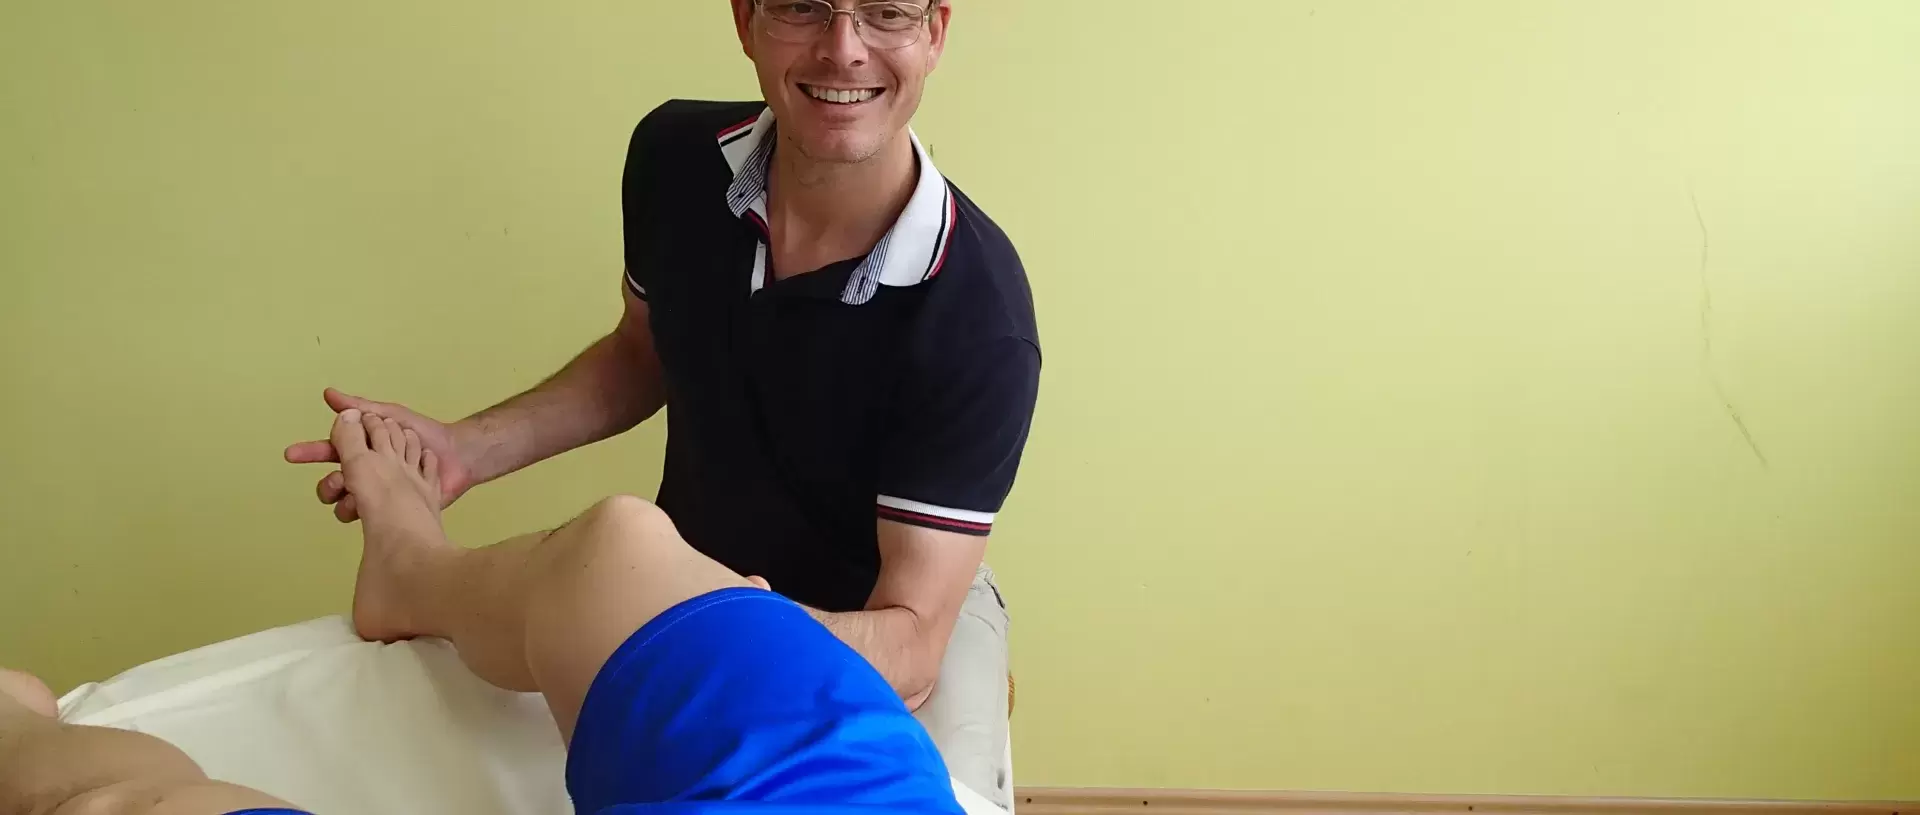 Rolf Movement™ was a rich addition to my Rolfing training